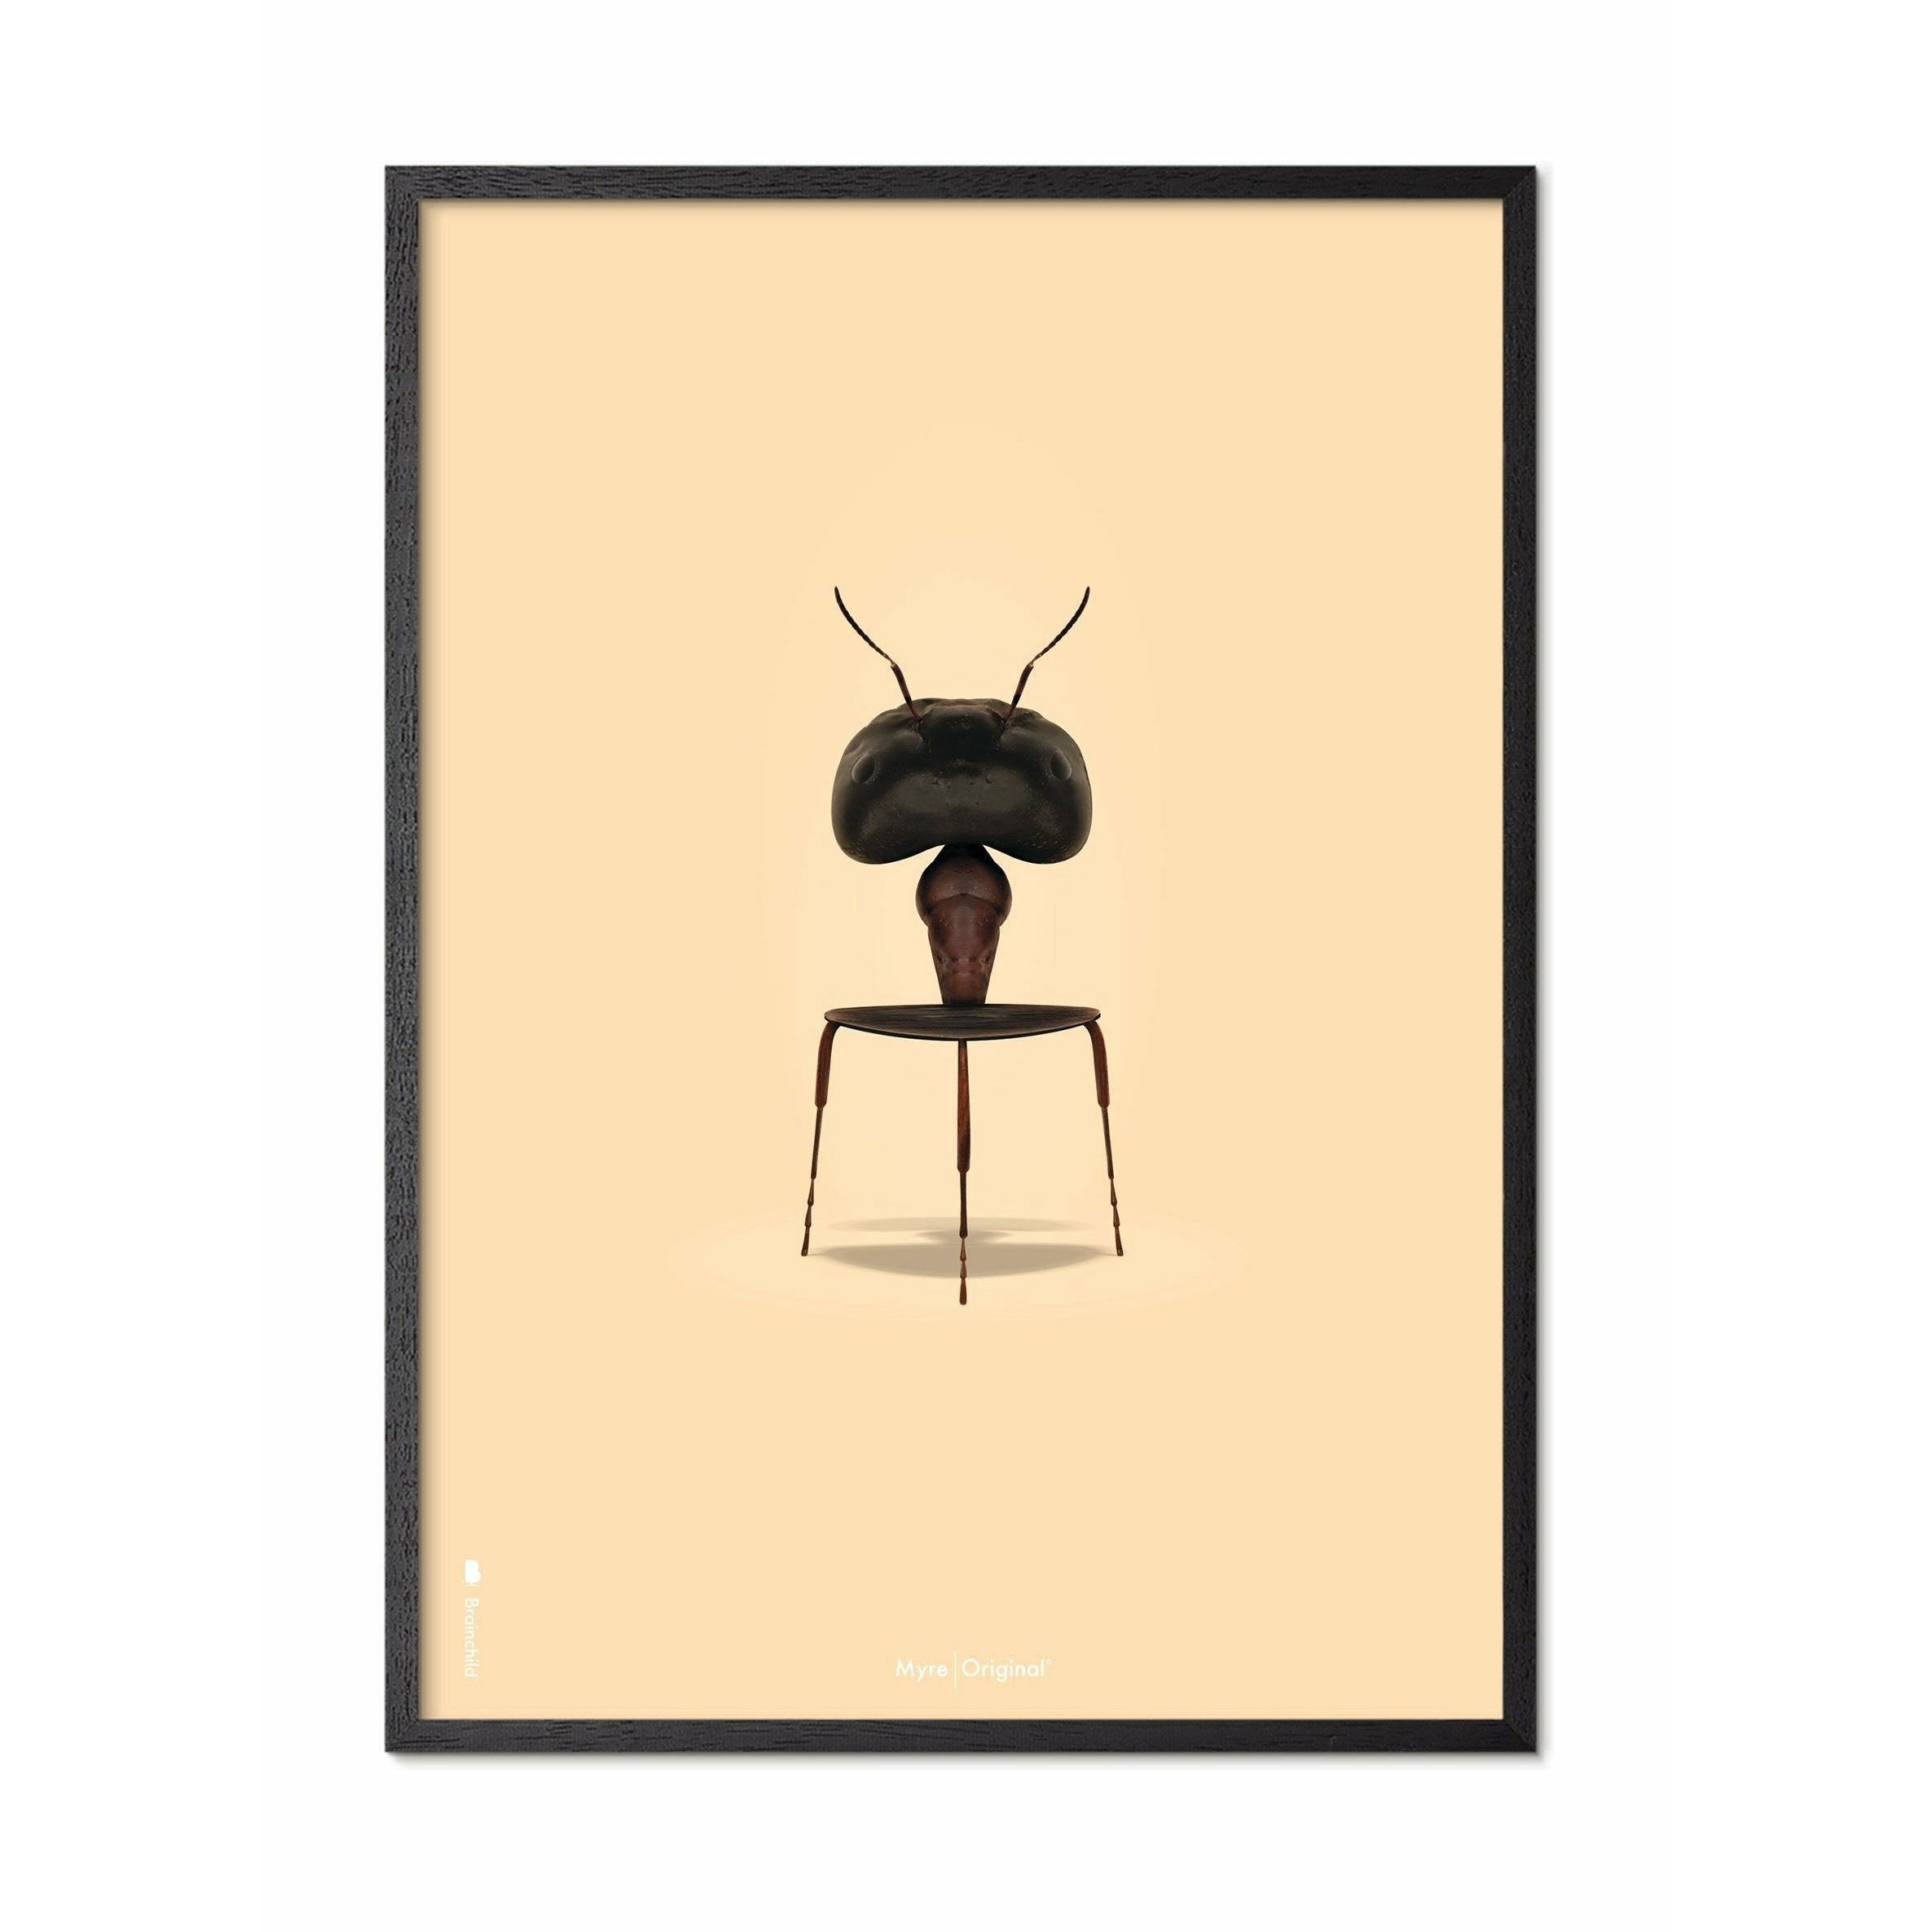 Brainchild Ant Classic Poster, Frame In Black Lacquered Wood 30x40 Cm, Sand Colored Background